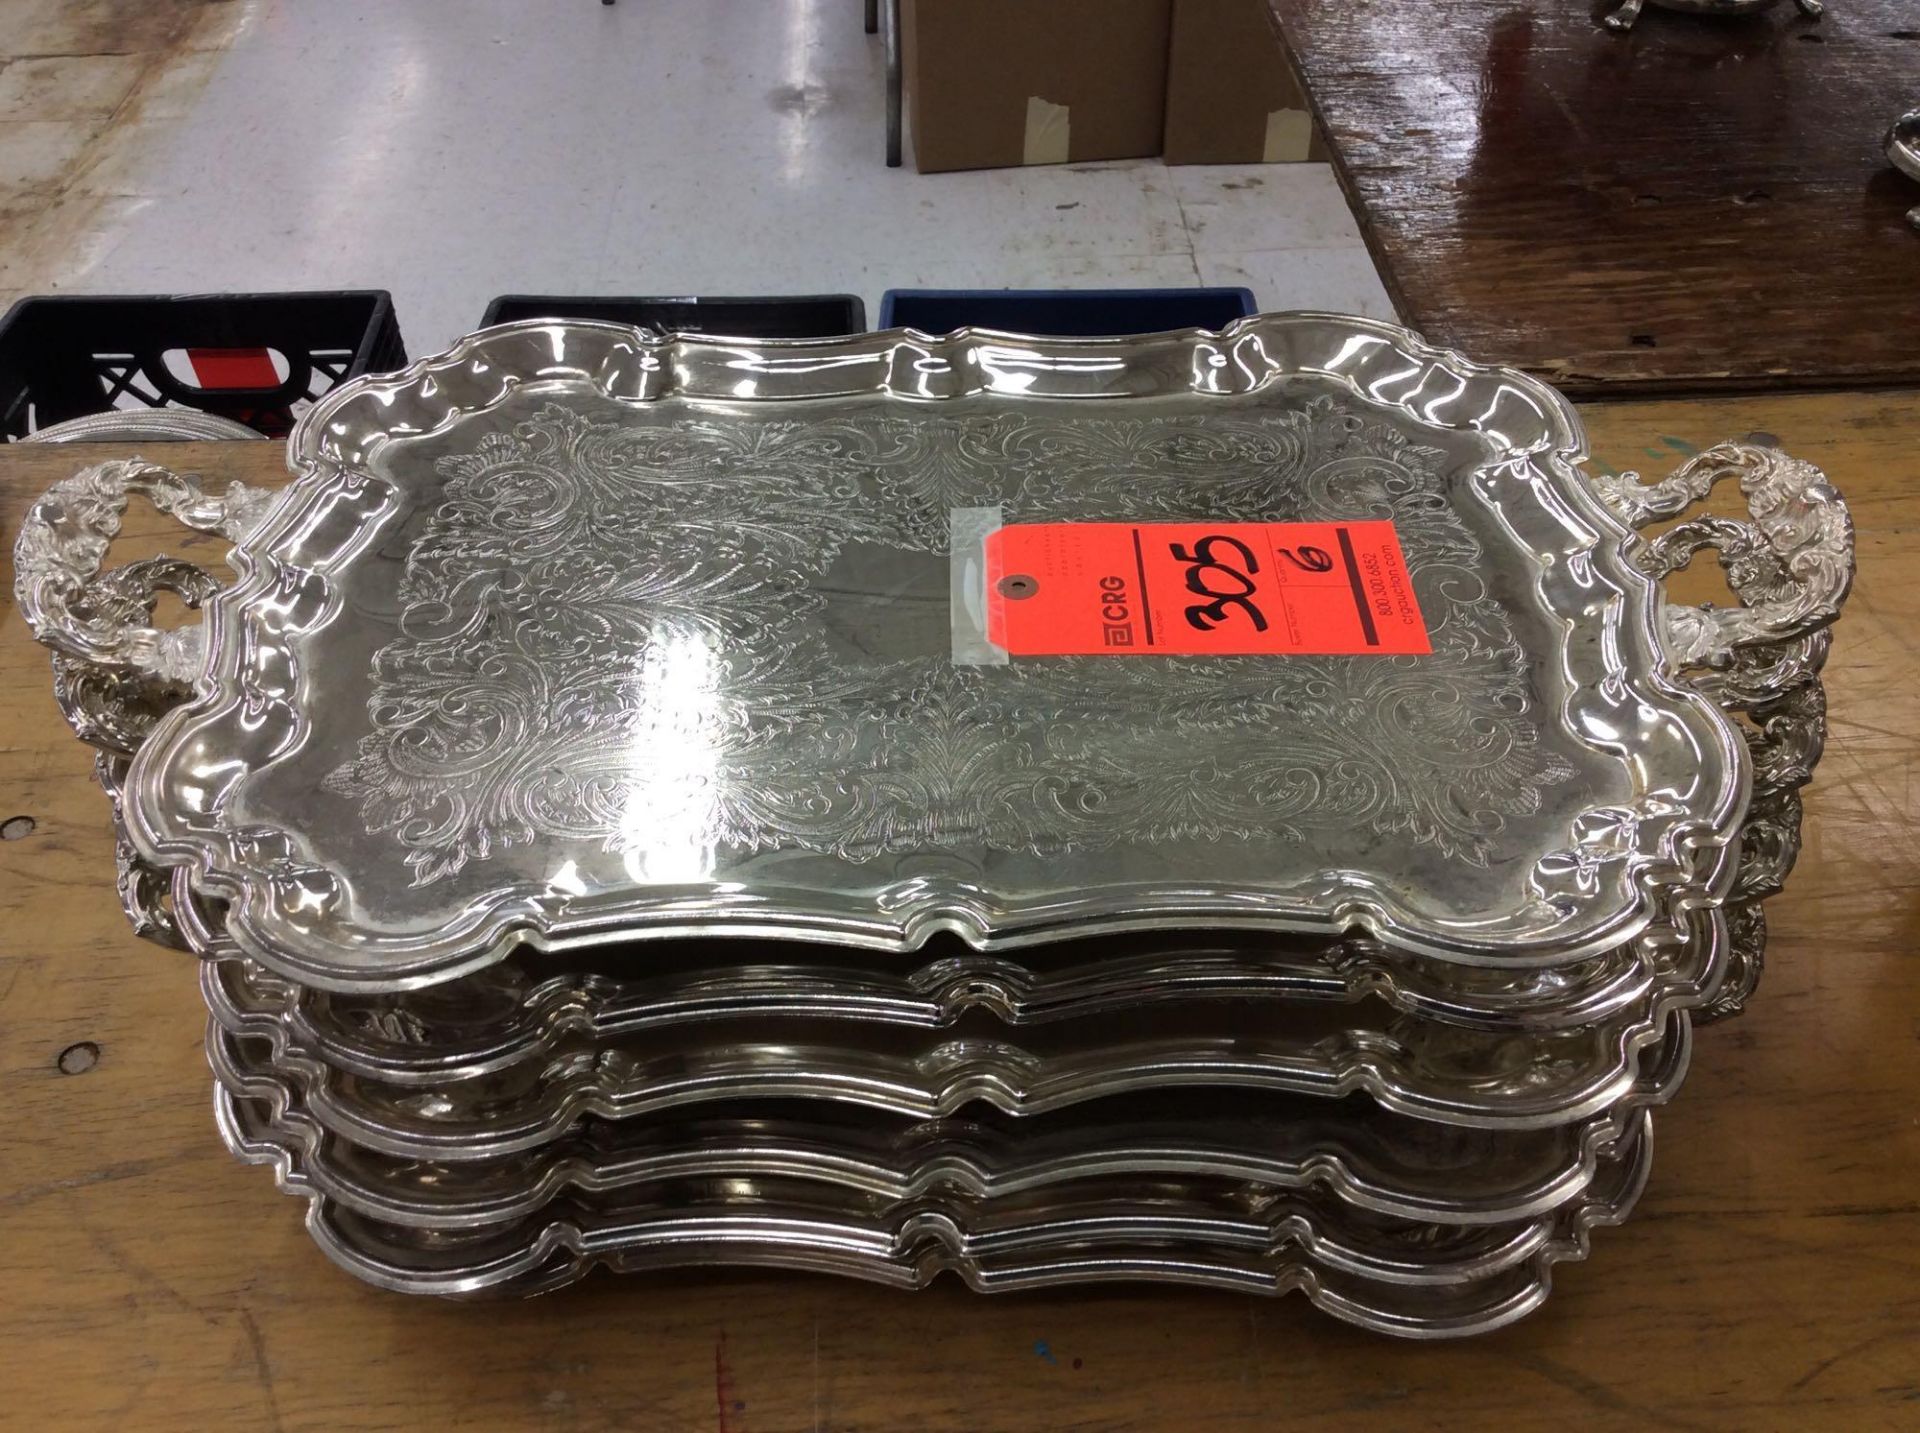 Lot of (6) 2-handled silver-plated serving trays, approx. 13.5" x 19"